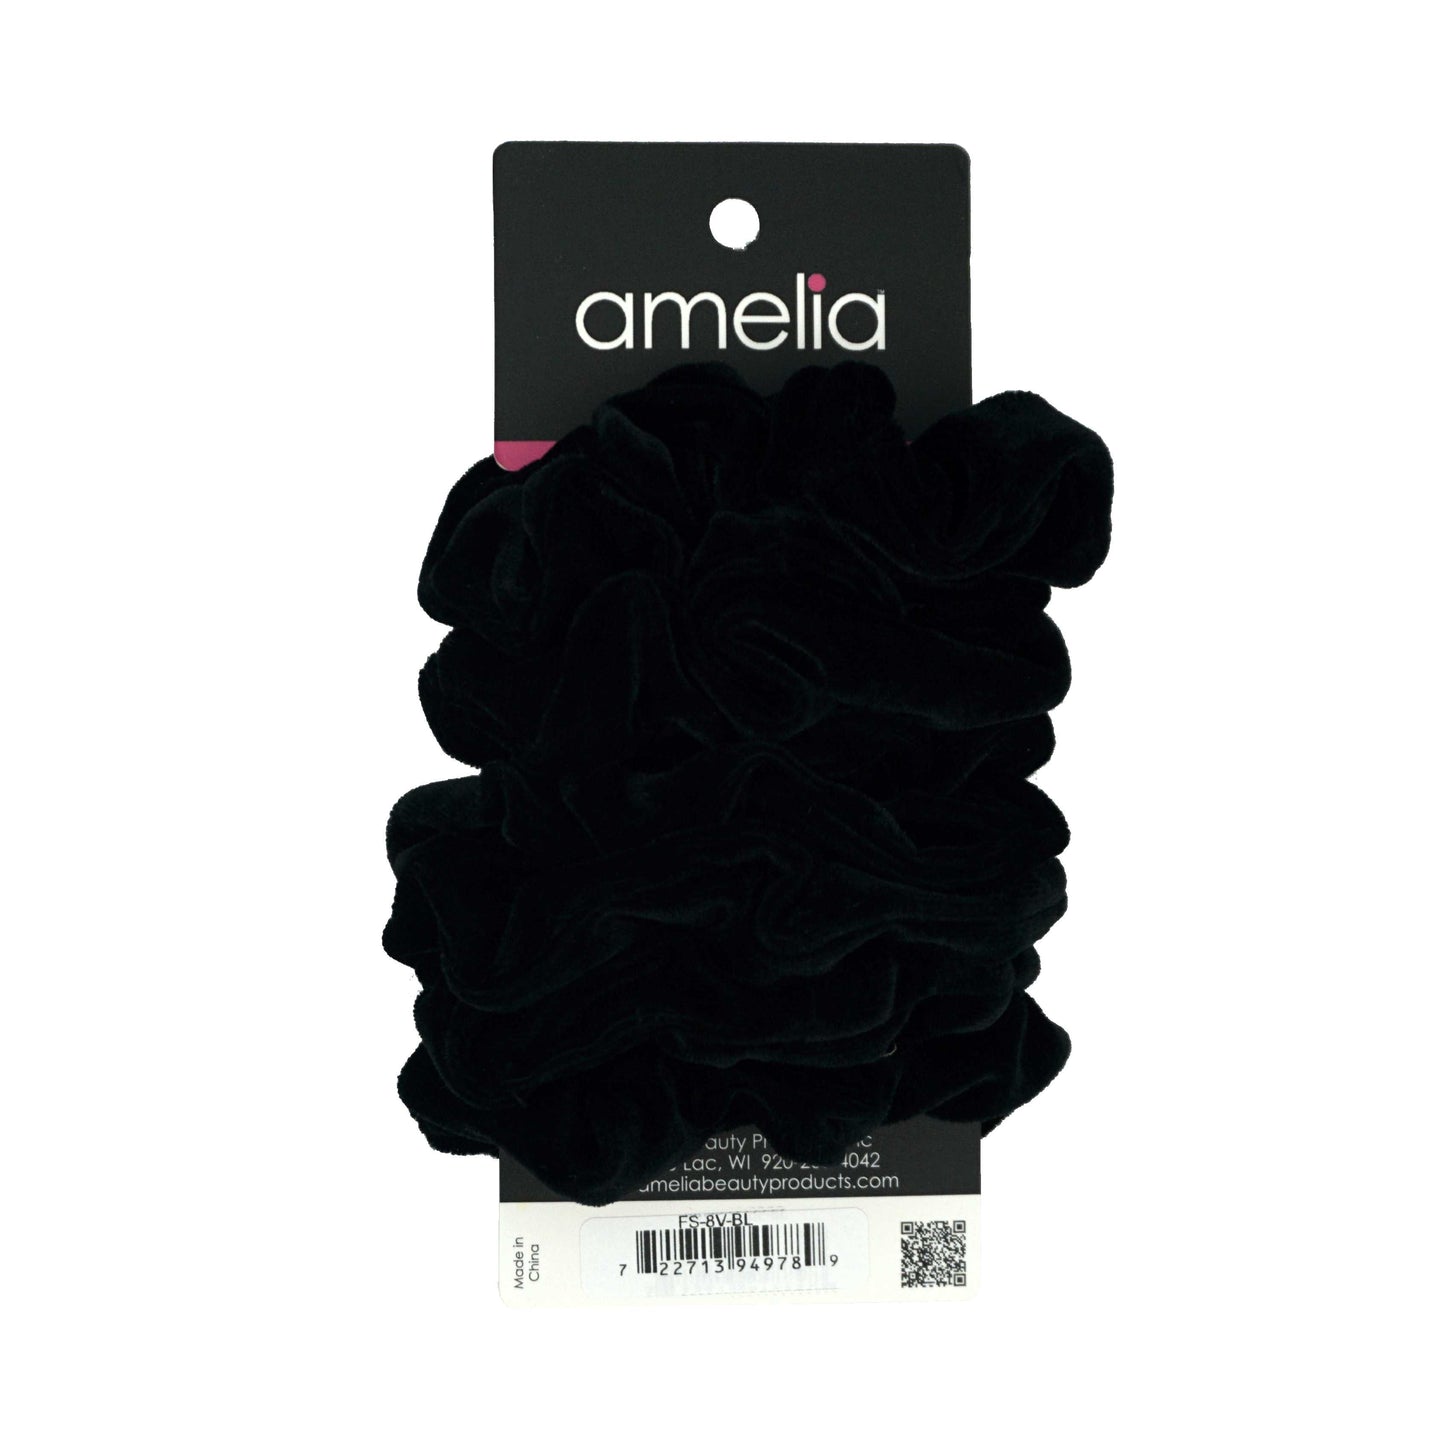 Amelia Beauty Products, Black Satin Scrunchies, 3.5in Diameter, Gentle on Hair, Strong Hold, No Snag, No Dents or Creases. 8 Pack